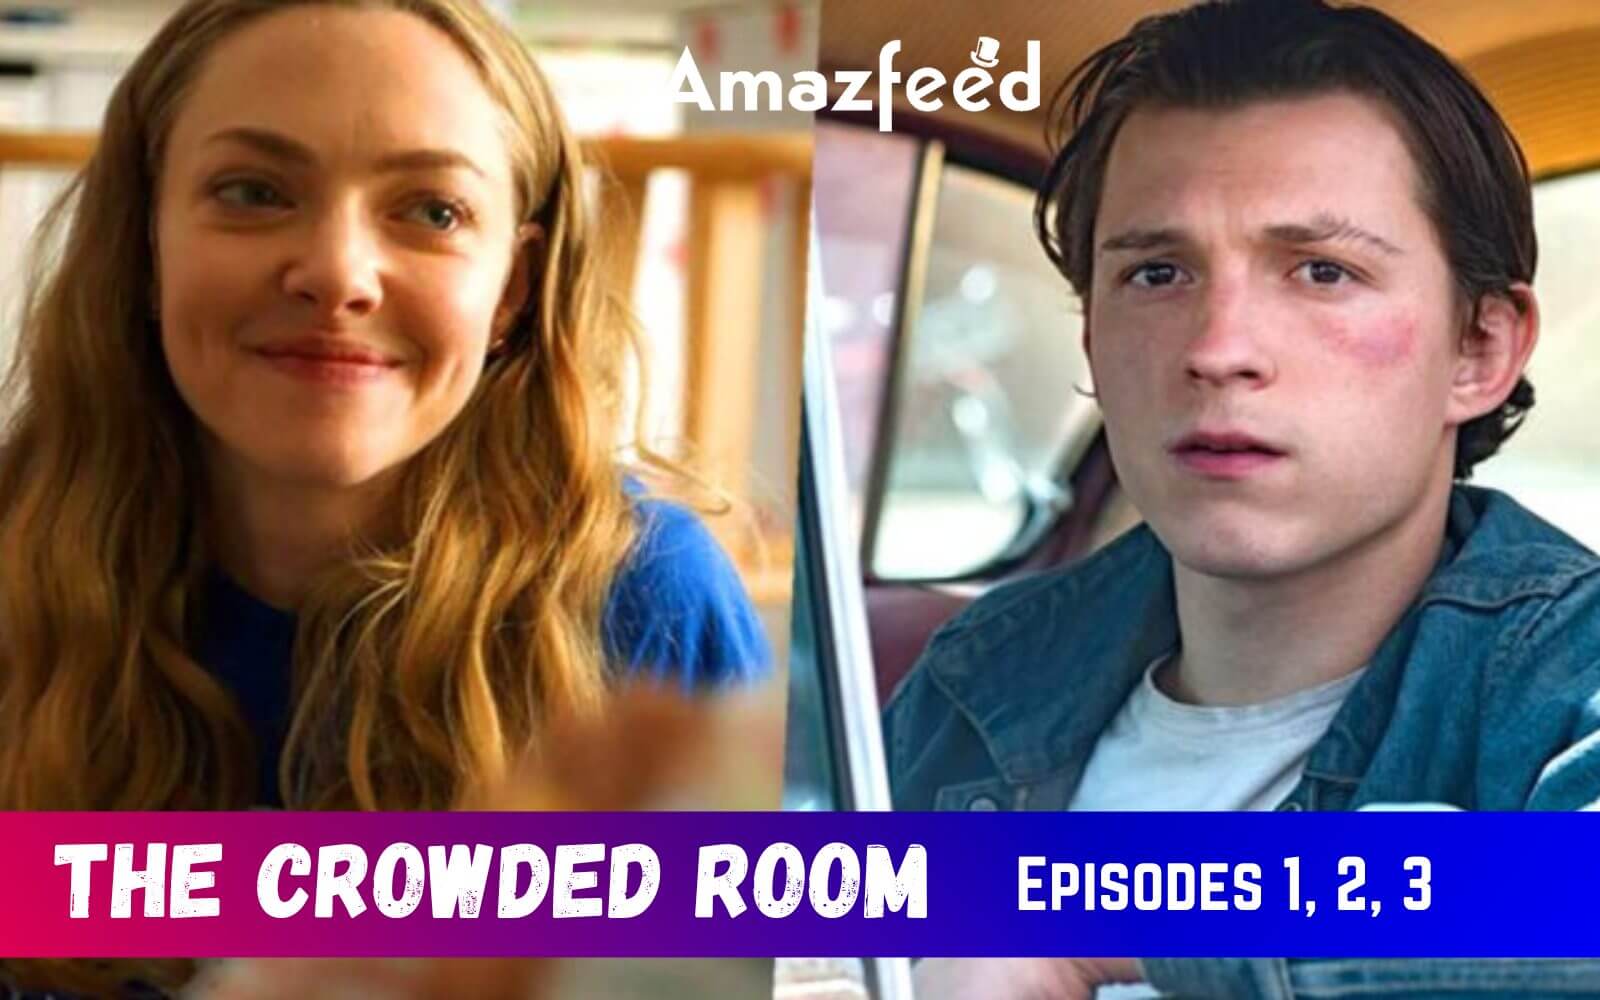 The Crowded Room Episodes 1, 2, 3 Release Date, Spoiler, Cast, plot